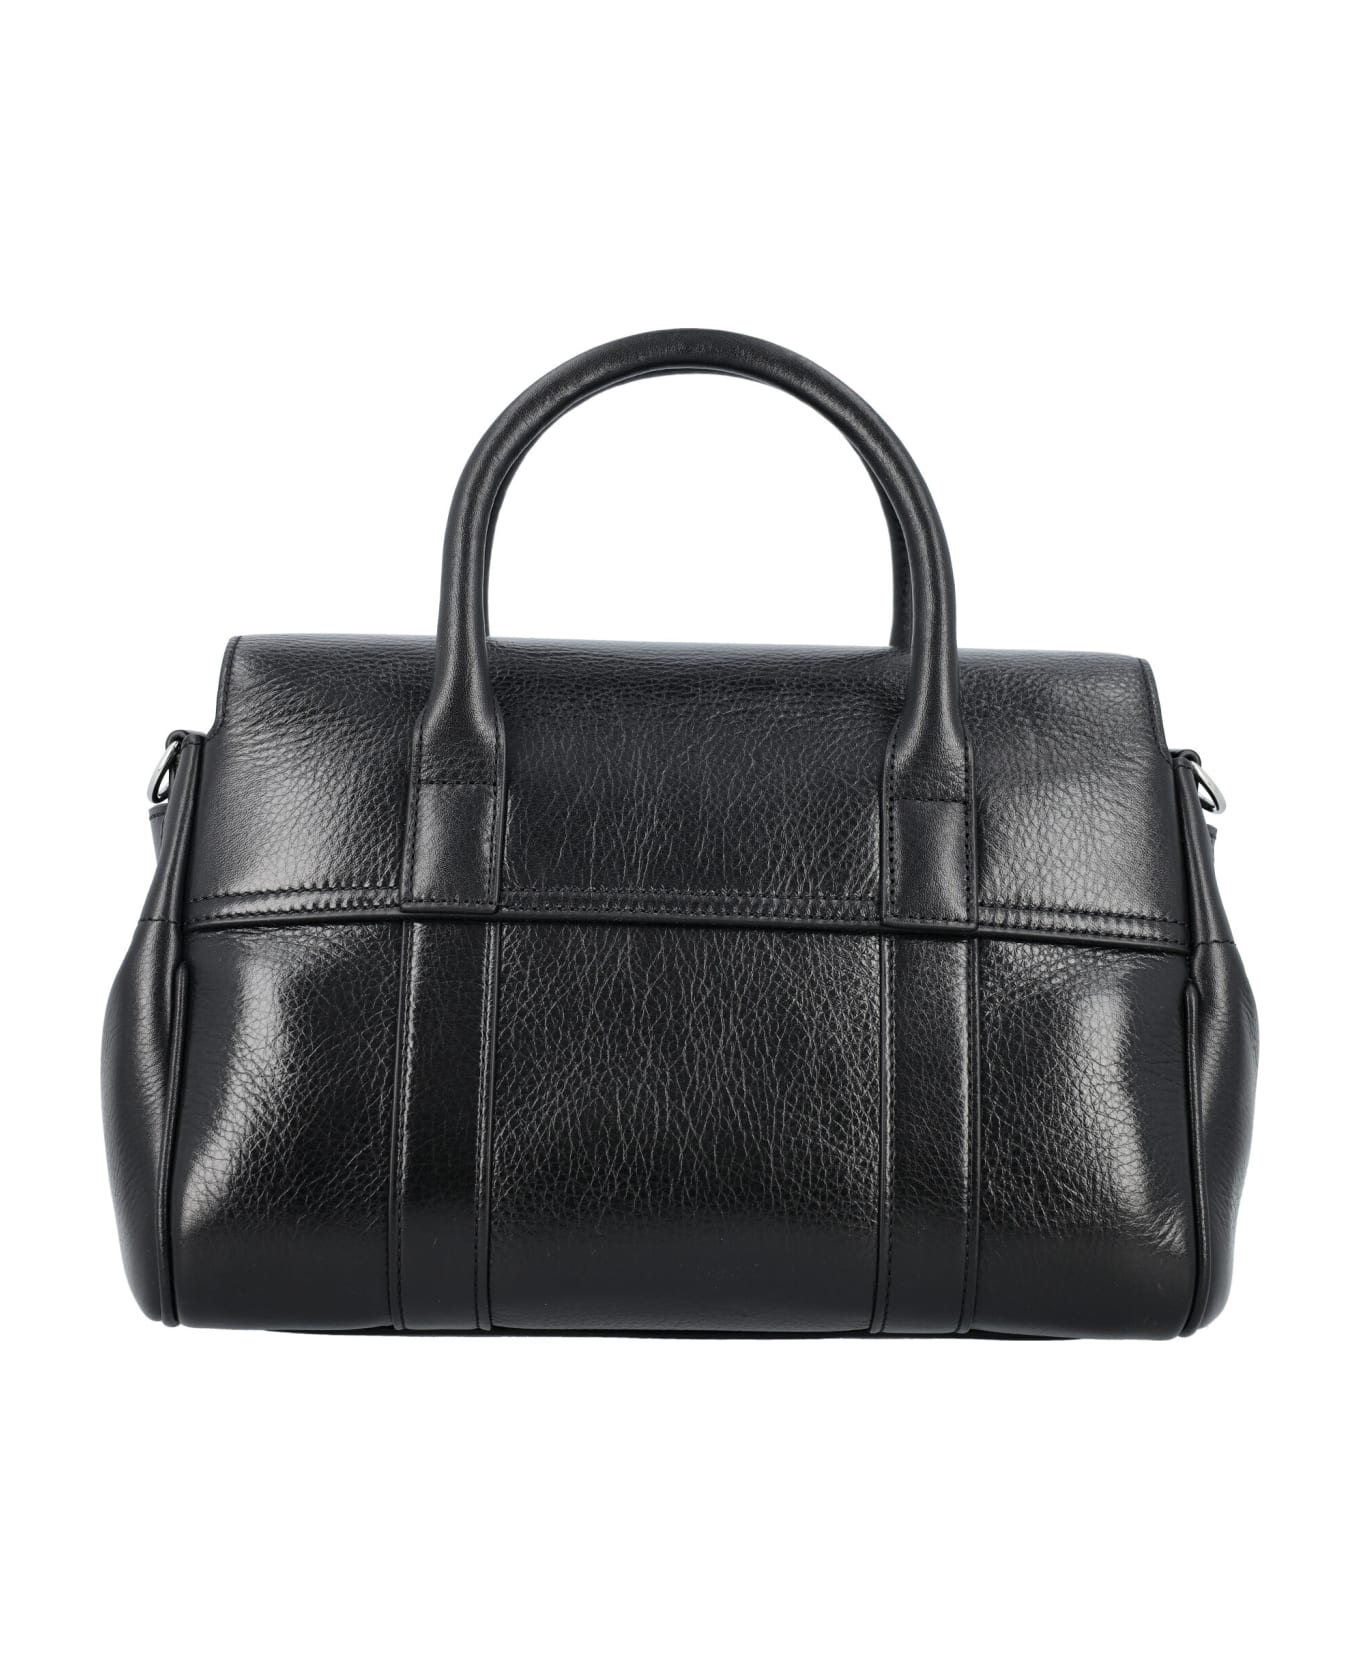 Mulberry Small Bayswater Satchel Bag - BLACK